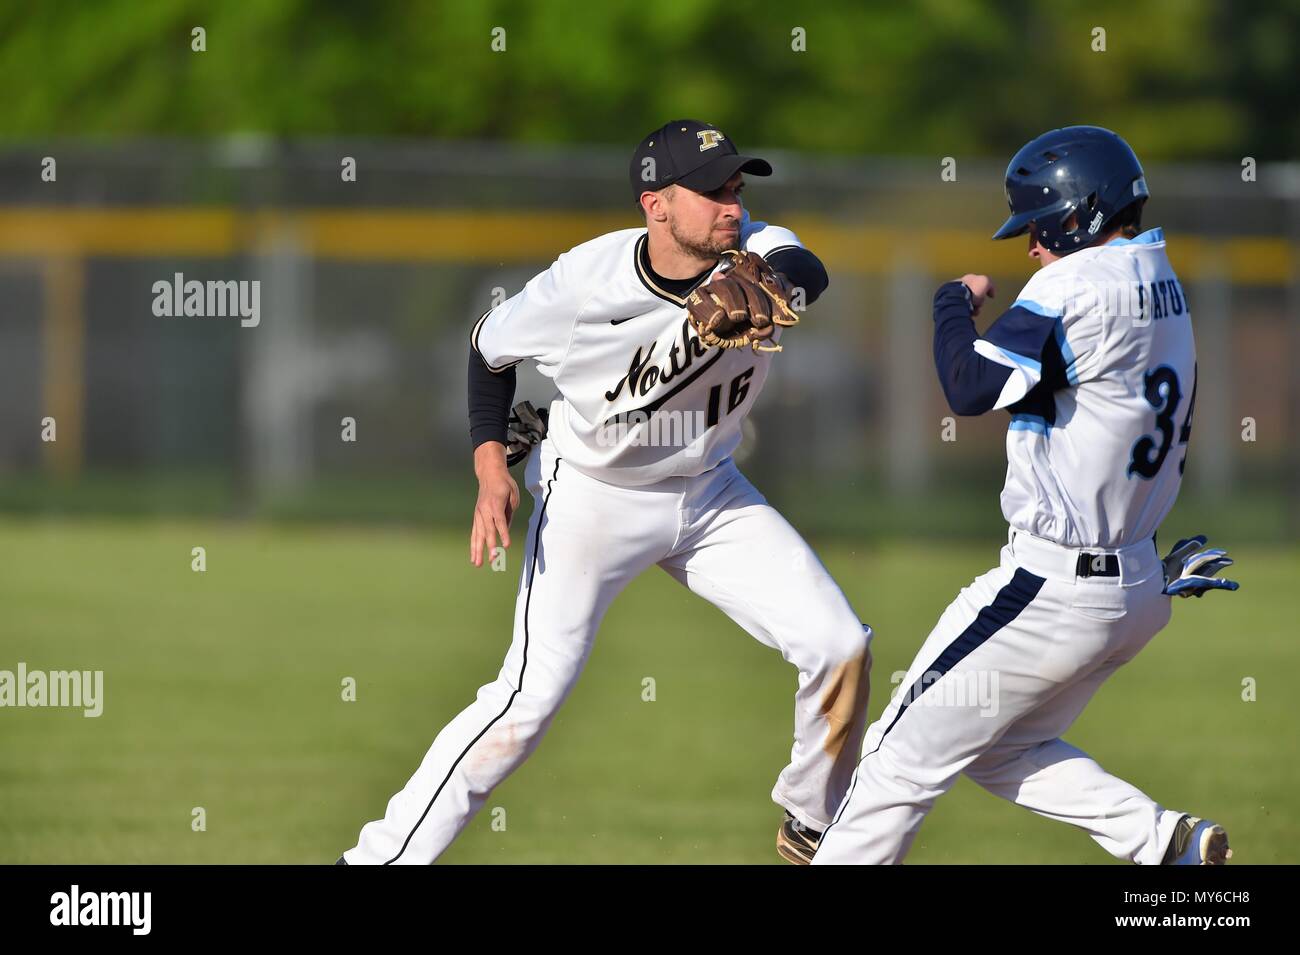 Shortstop reaching in front of an opposing runner to record a force out at second base. USA. Stock Photo